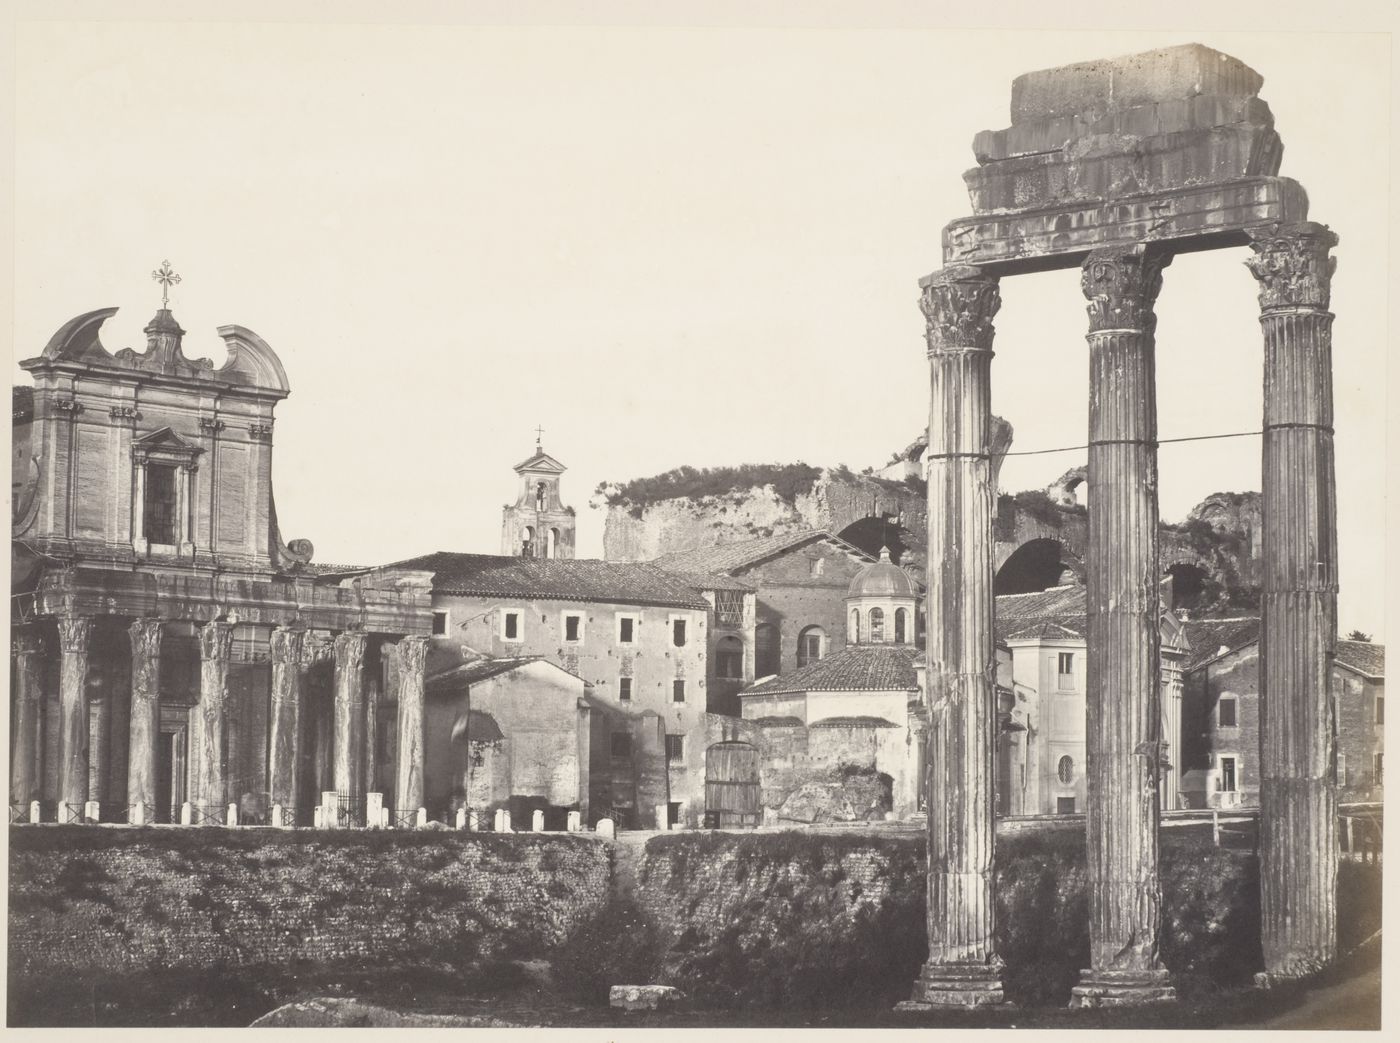 View of the Roman Forum with the Temple of Antoninus and Faustina, the Temple of the Dioscuri in the Circus Flaminius, and in the distance the Basilica of Constantine, Rome, Italy